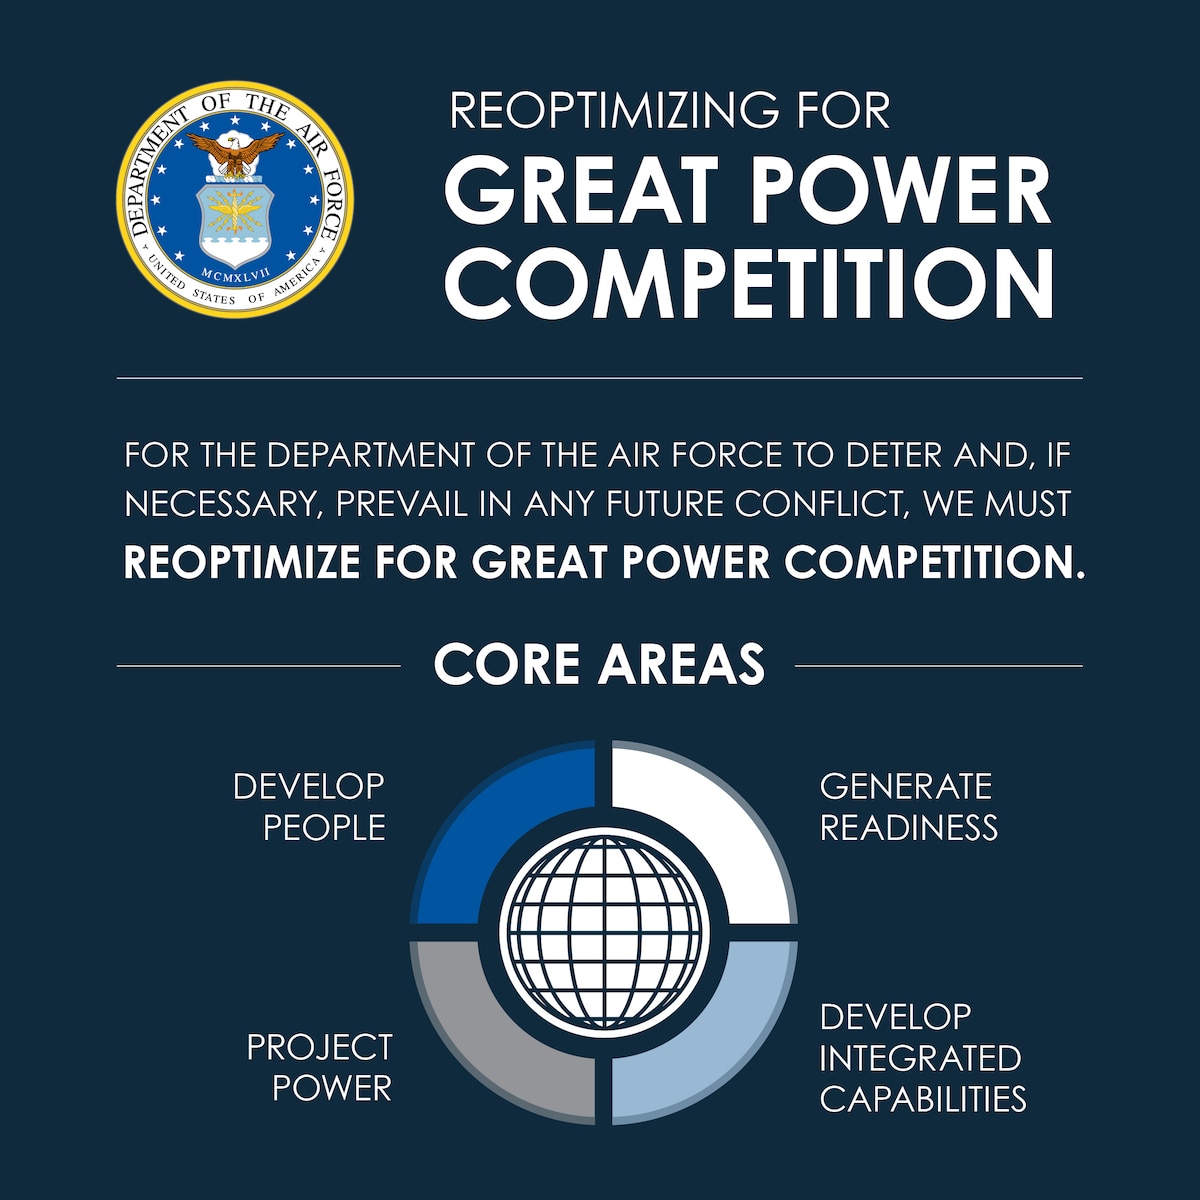 Reoptimizing for Great Power Competition infographic